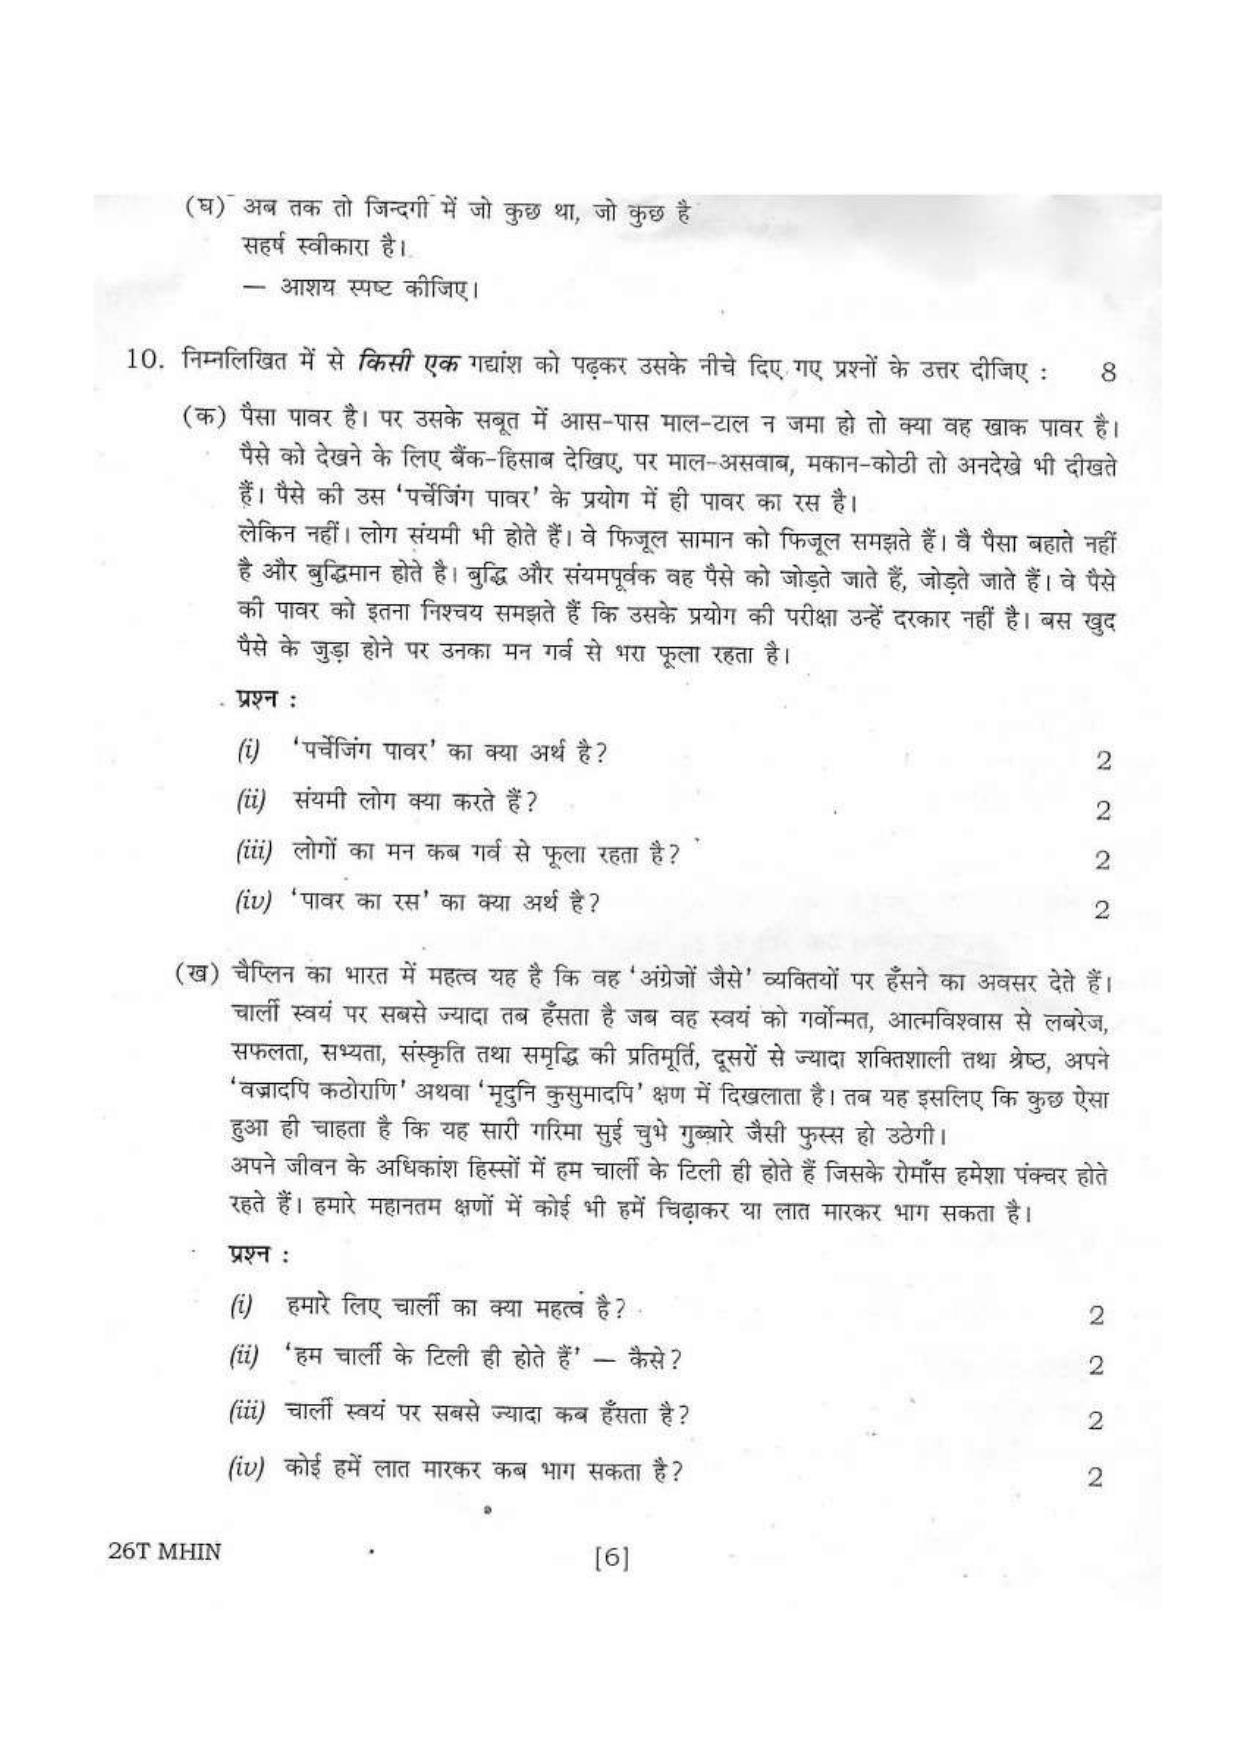 Assam HS 2nd Year Hindi MIL 2016 Question Paper - Page 6